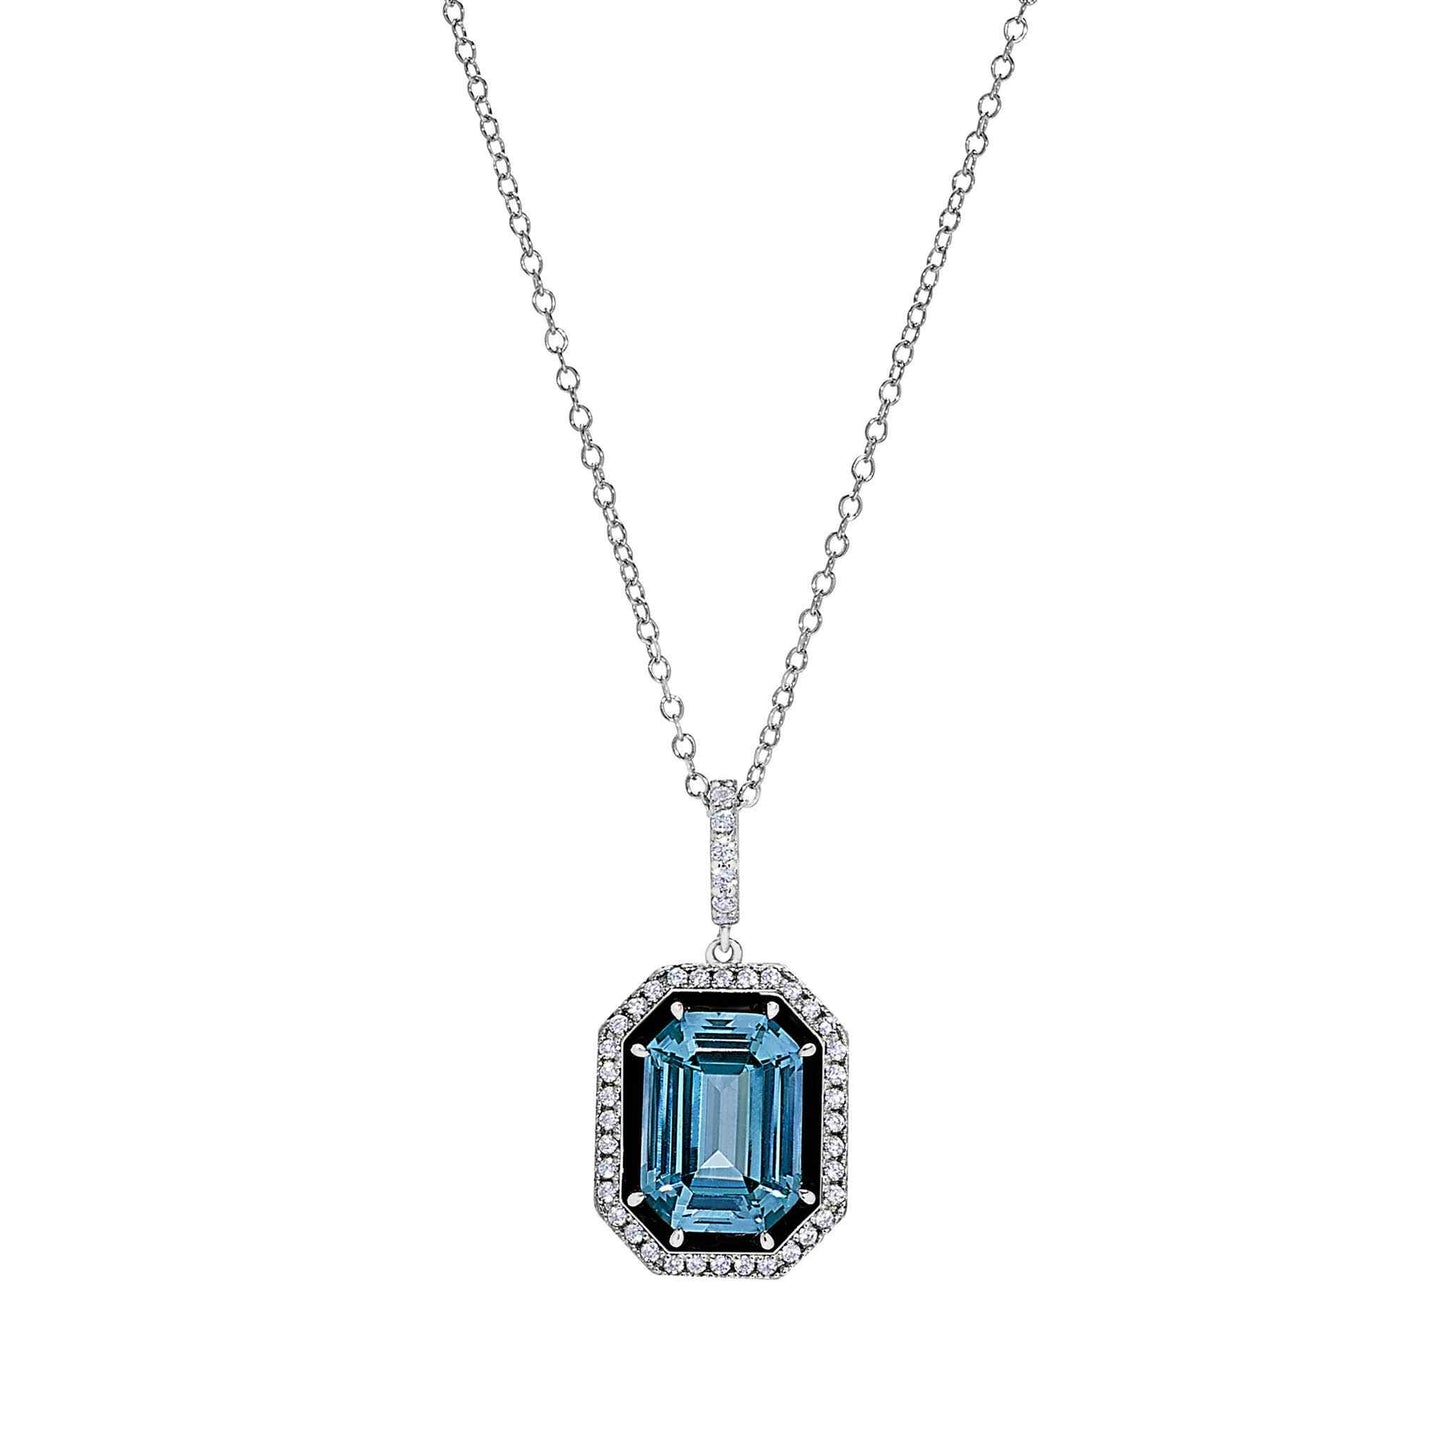 A black enamel & aqua spinel octagon pendant with simulated diamonds displayed on a neutral white background.